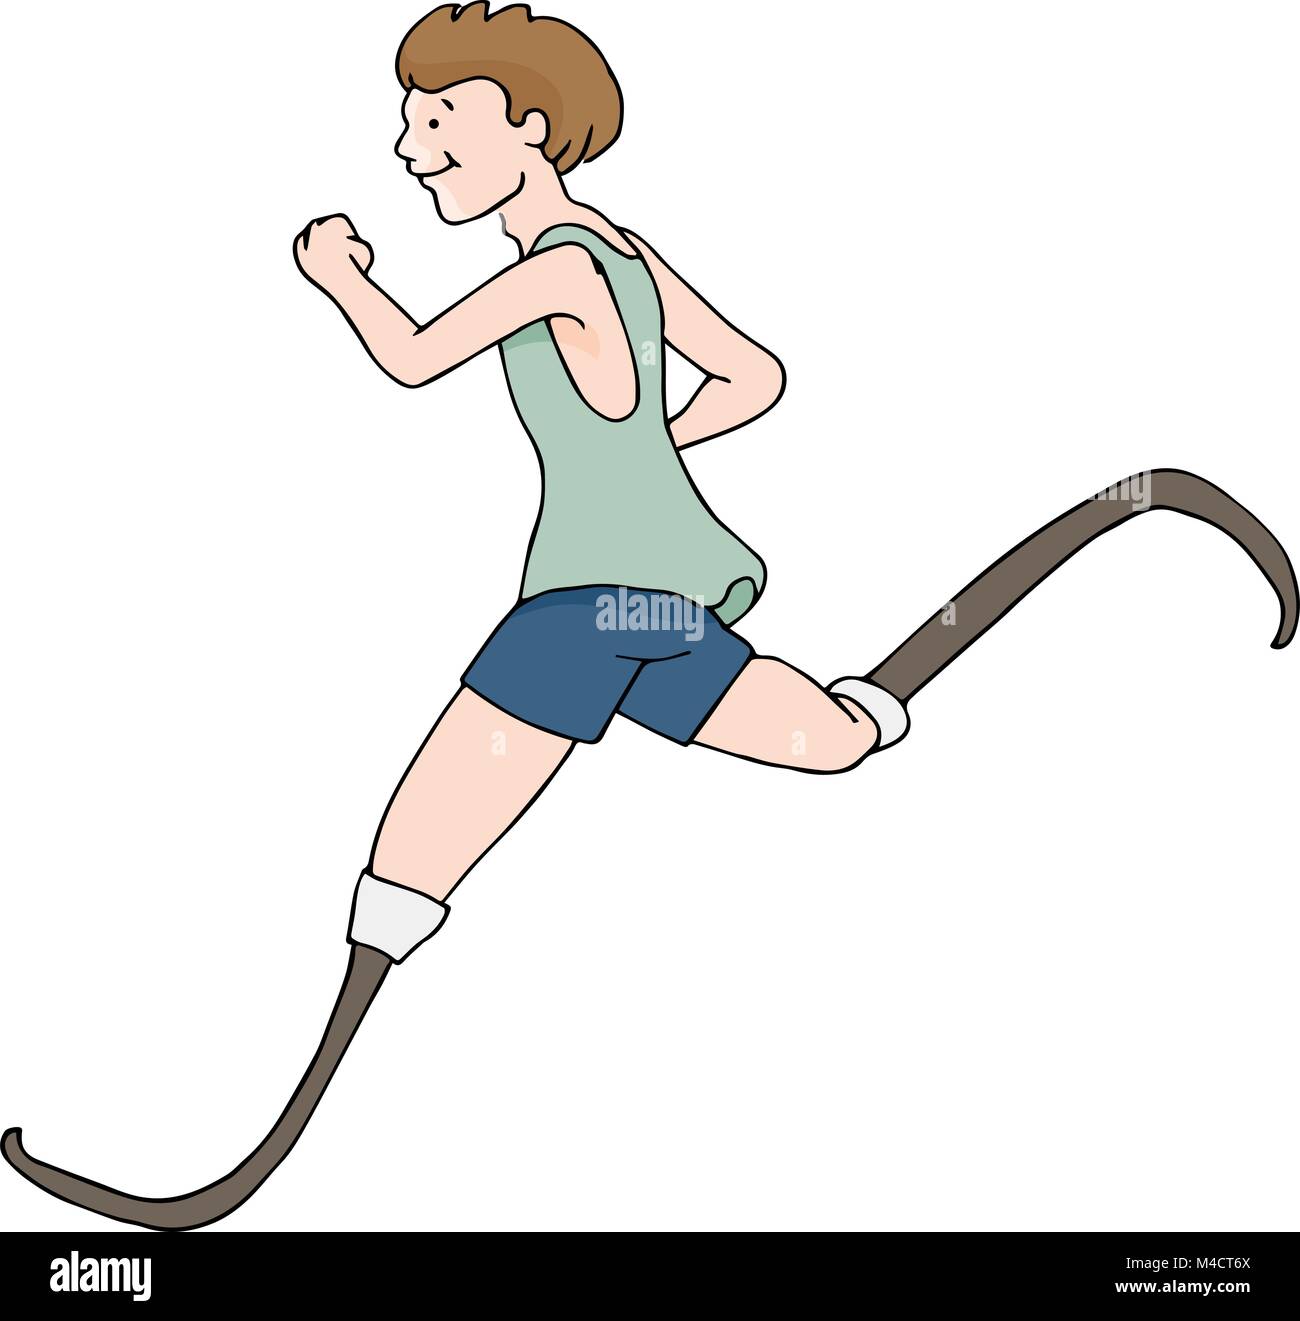 An image of a runner with prosthetic legs. Stock Vector